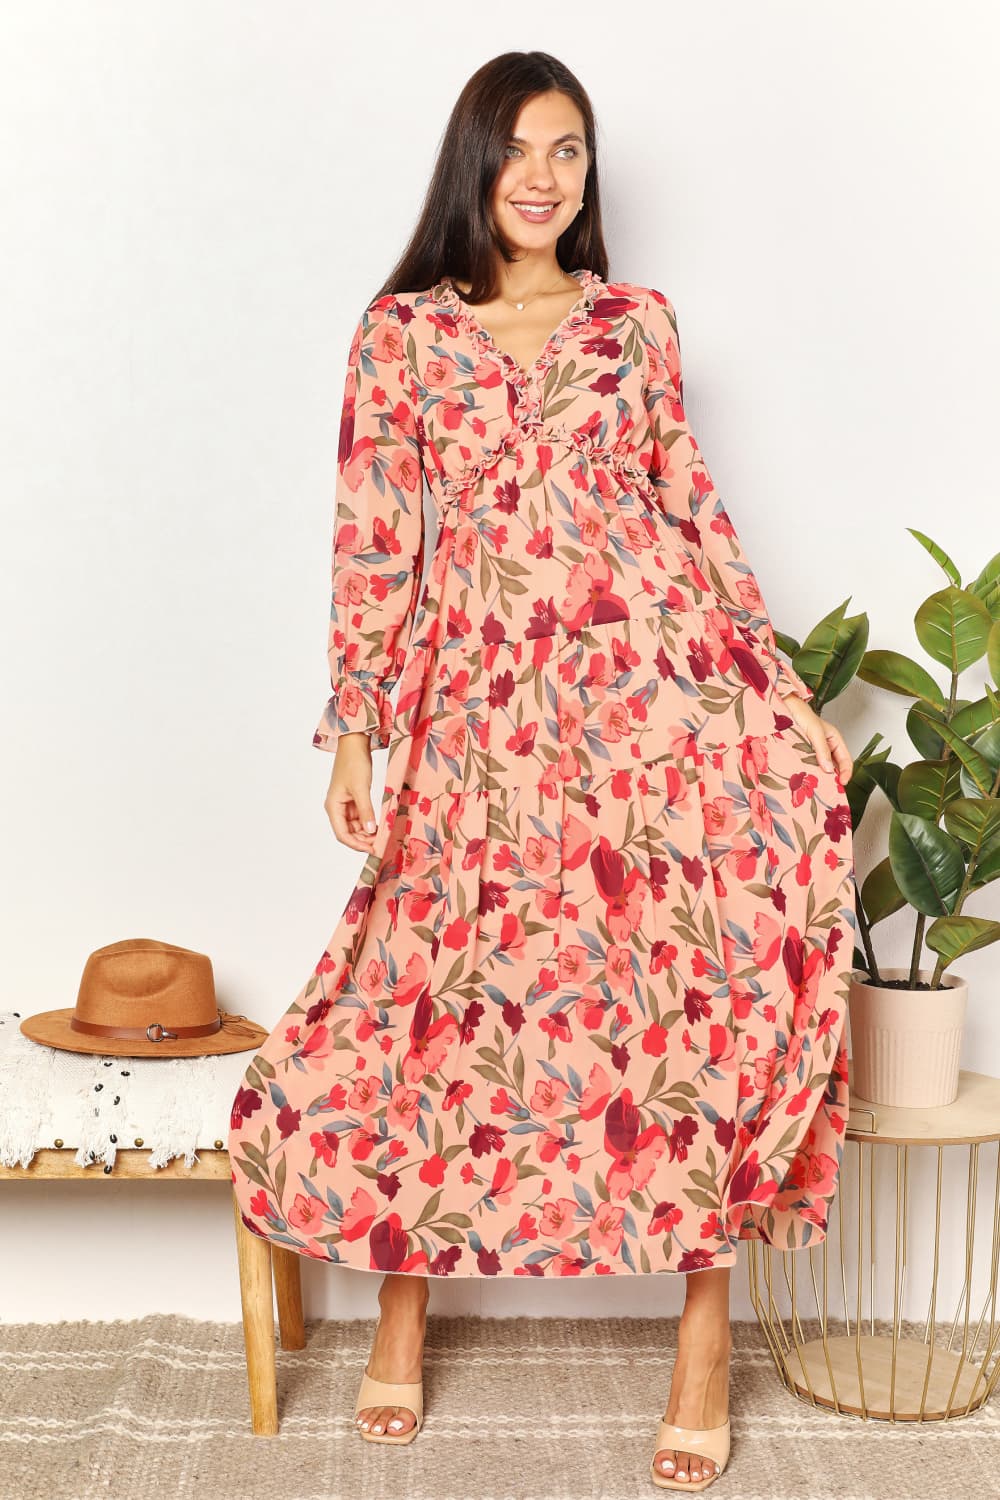 Elegant Beach Wedding Guest Maxi Dress with Floral Frill and Flounce Sleeves for Women